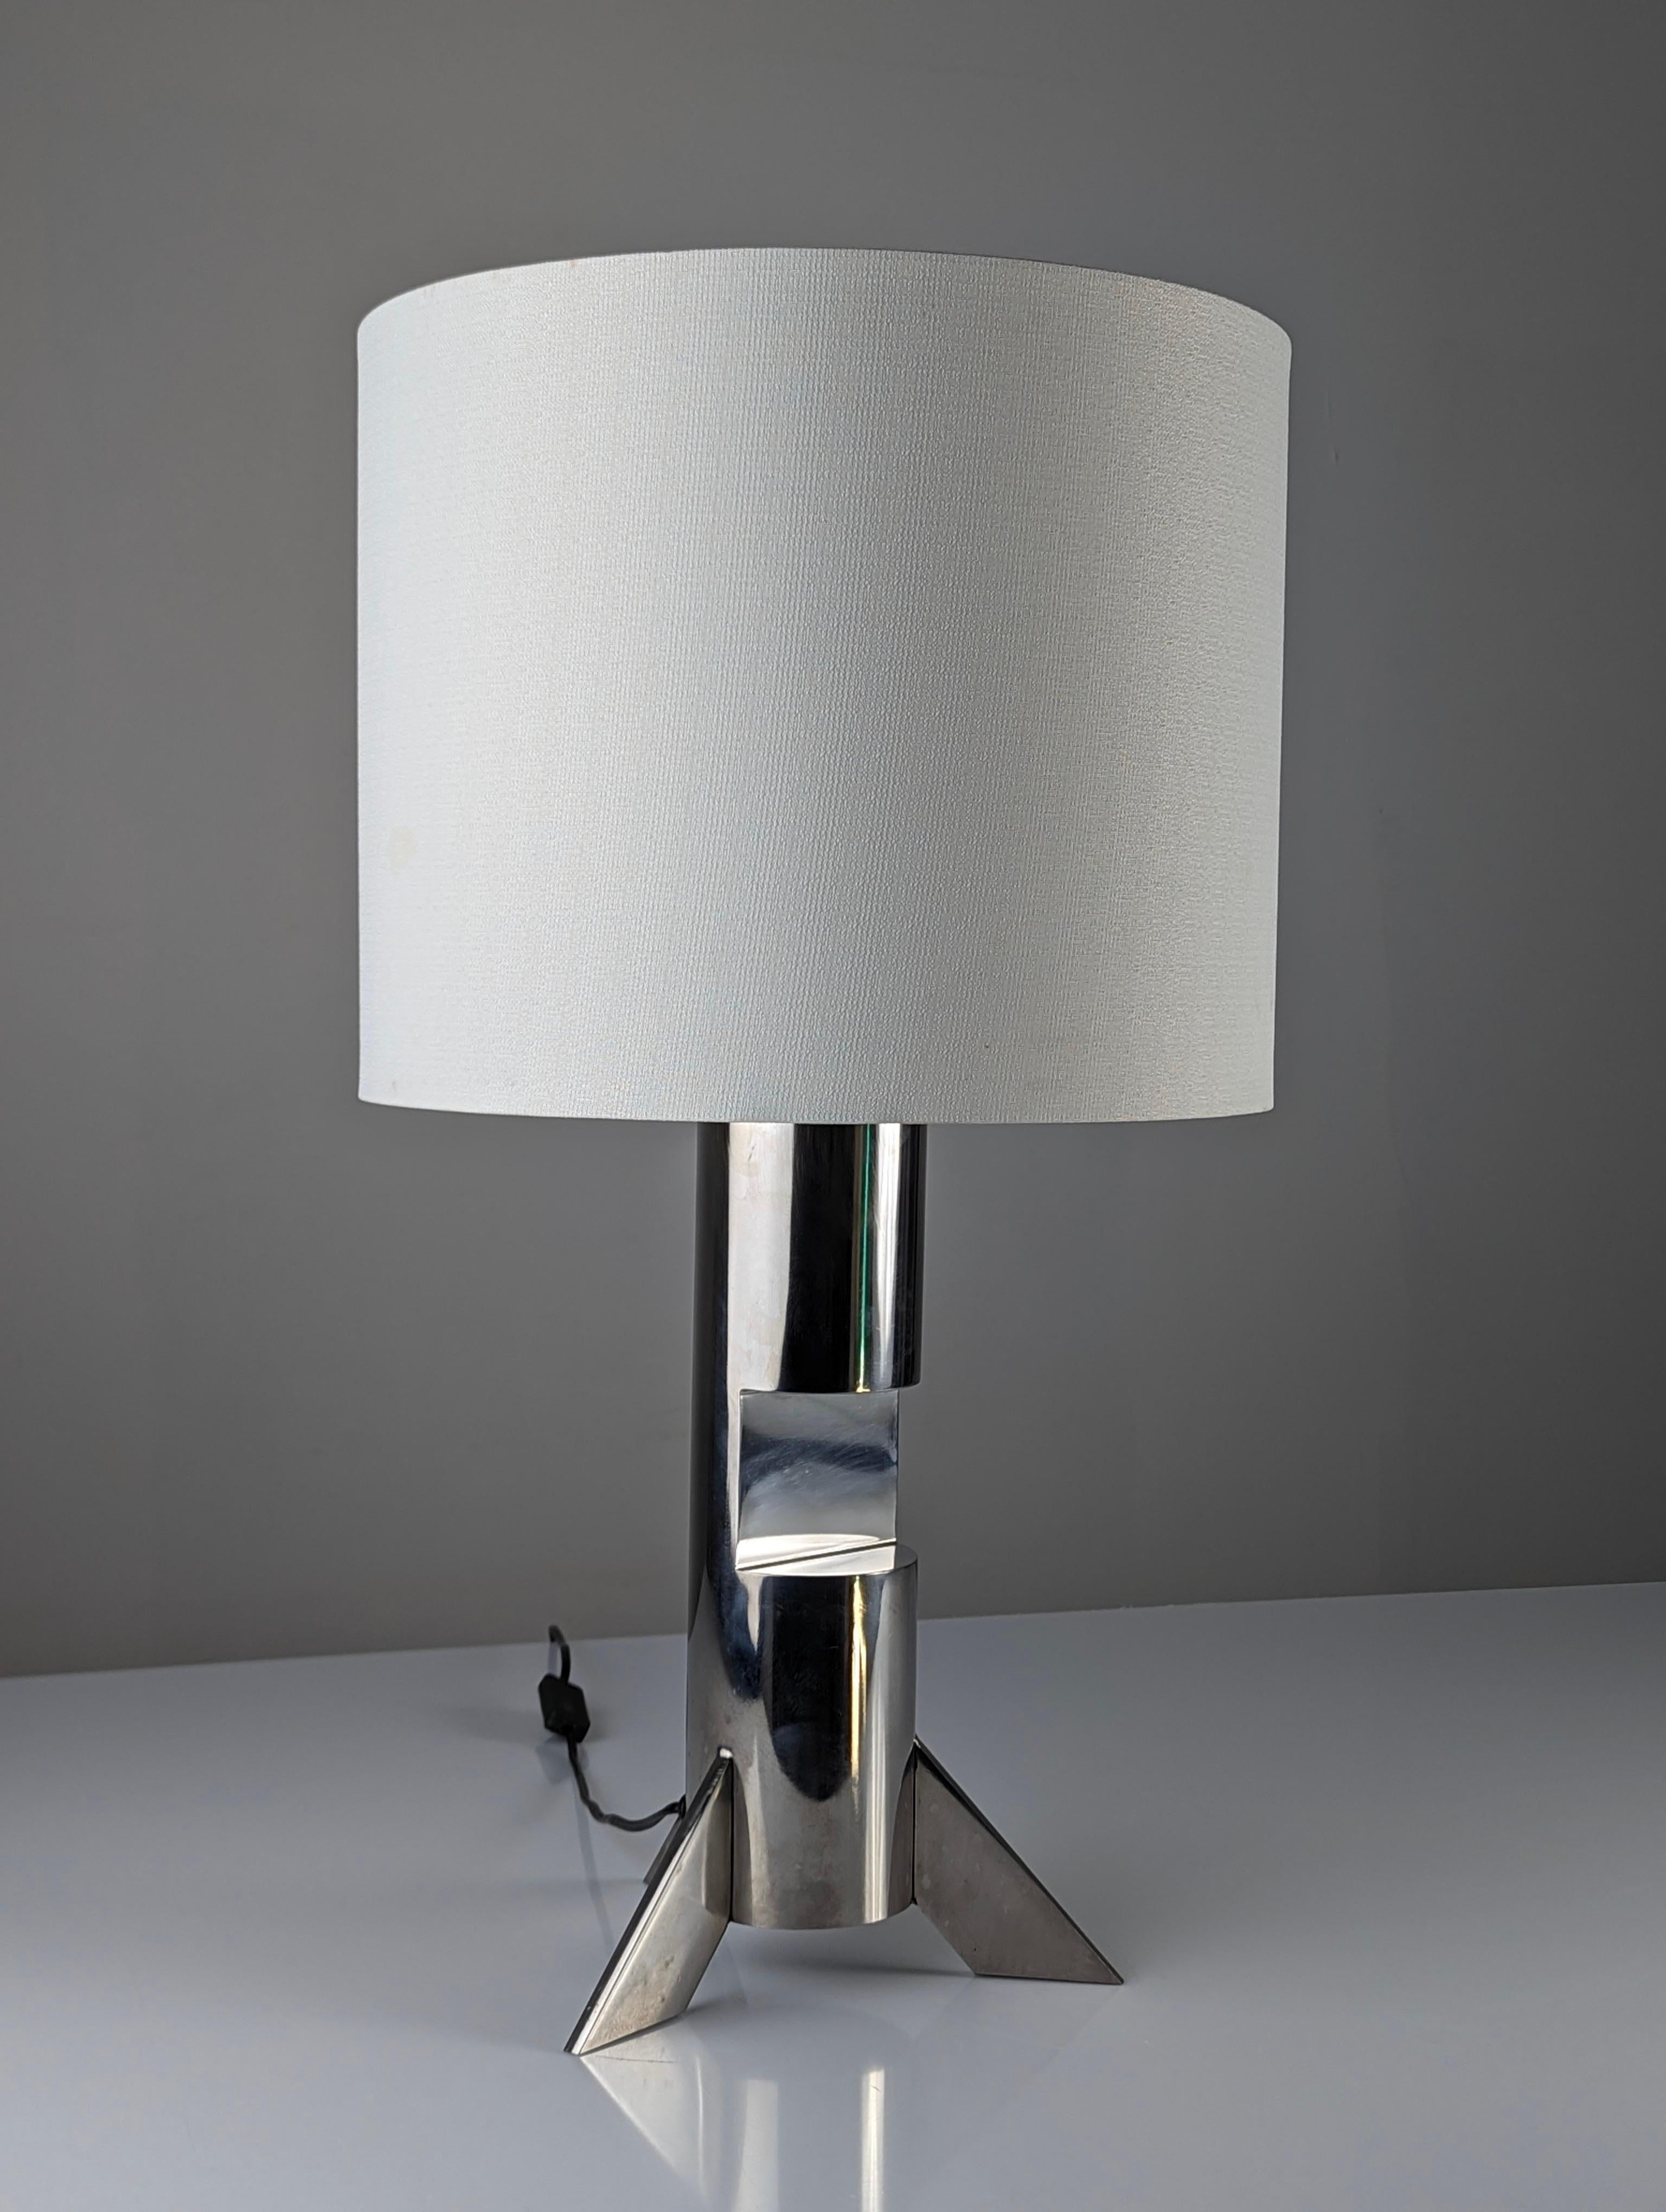 Late 20th Century Steel Sculpture Table Lamp, 1970s For Sale